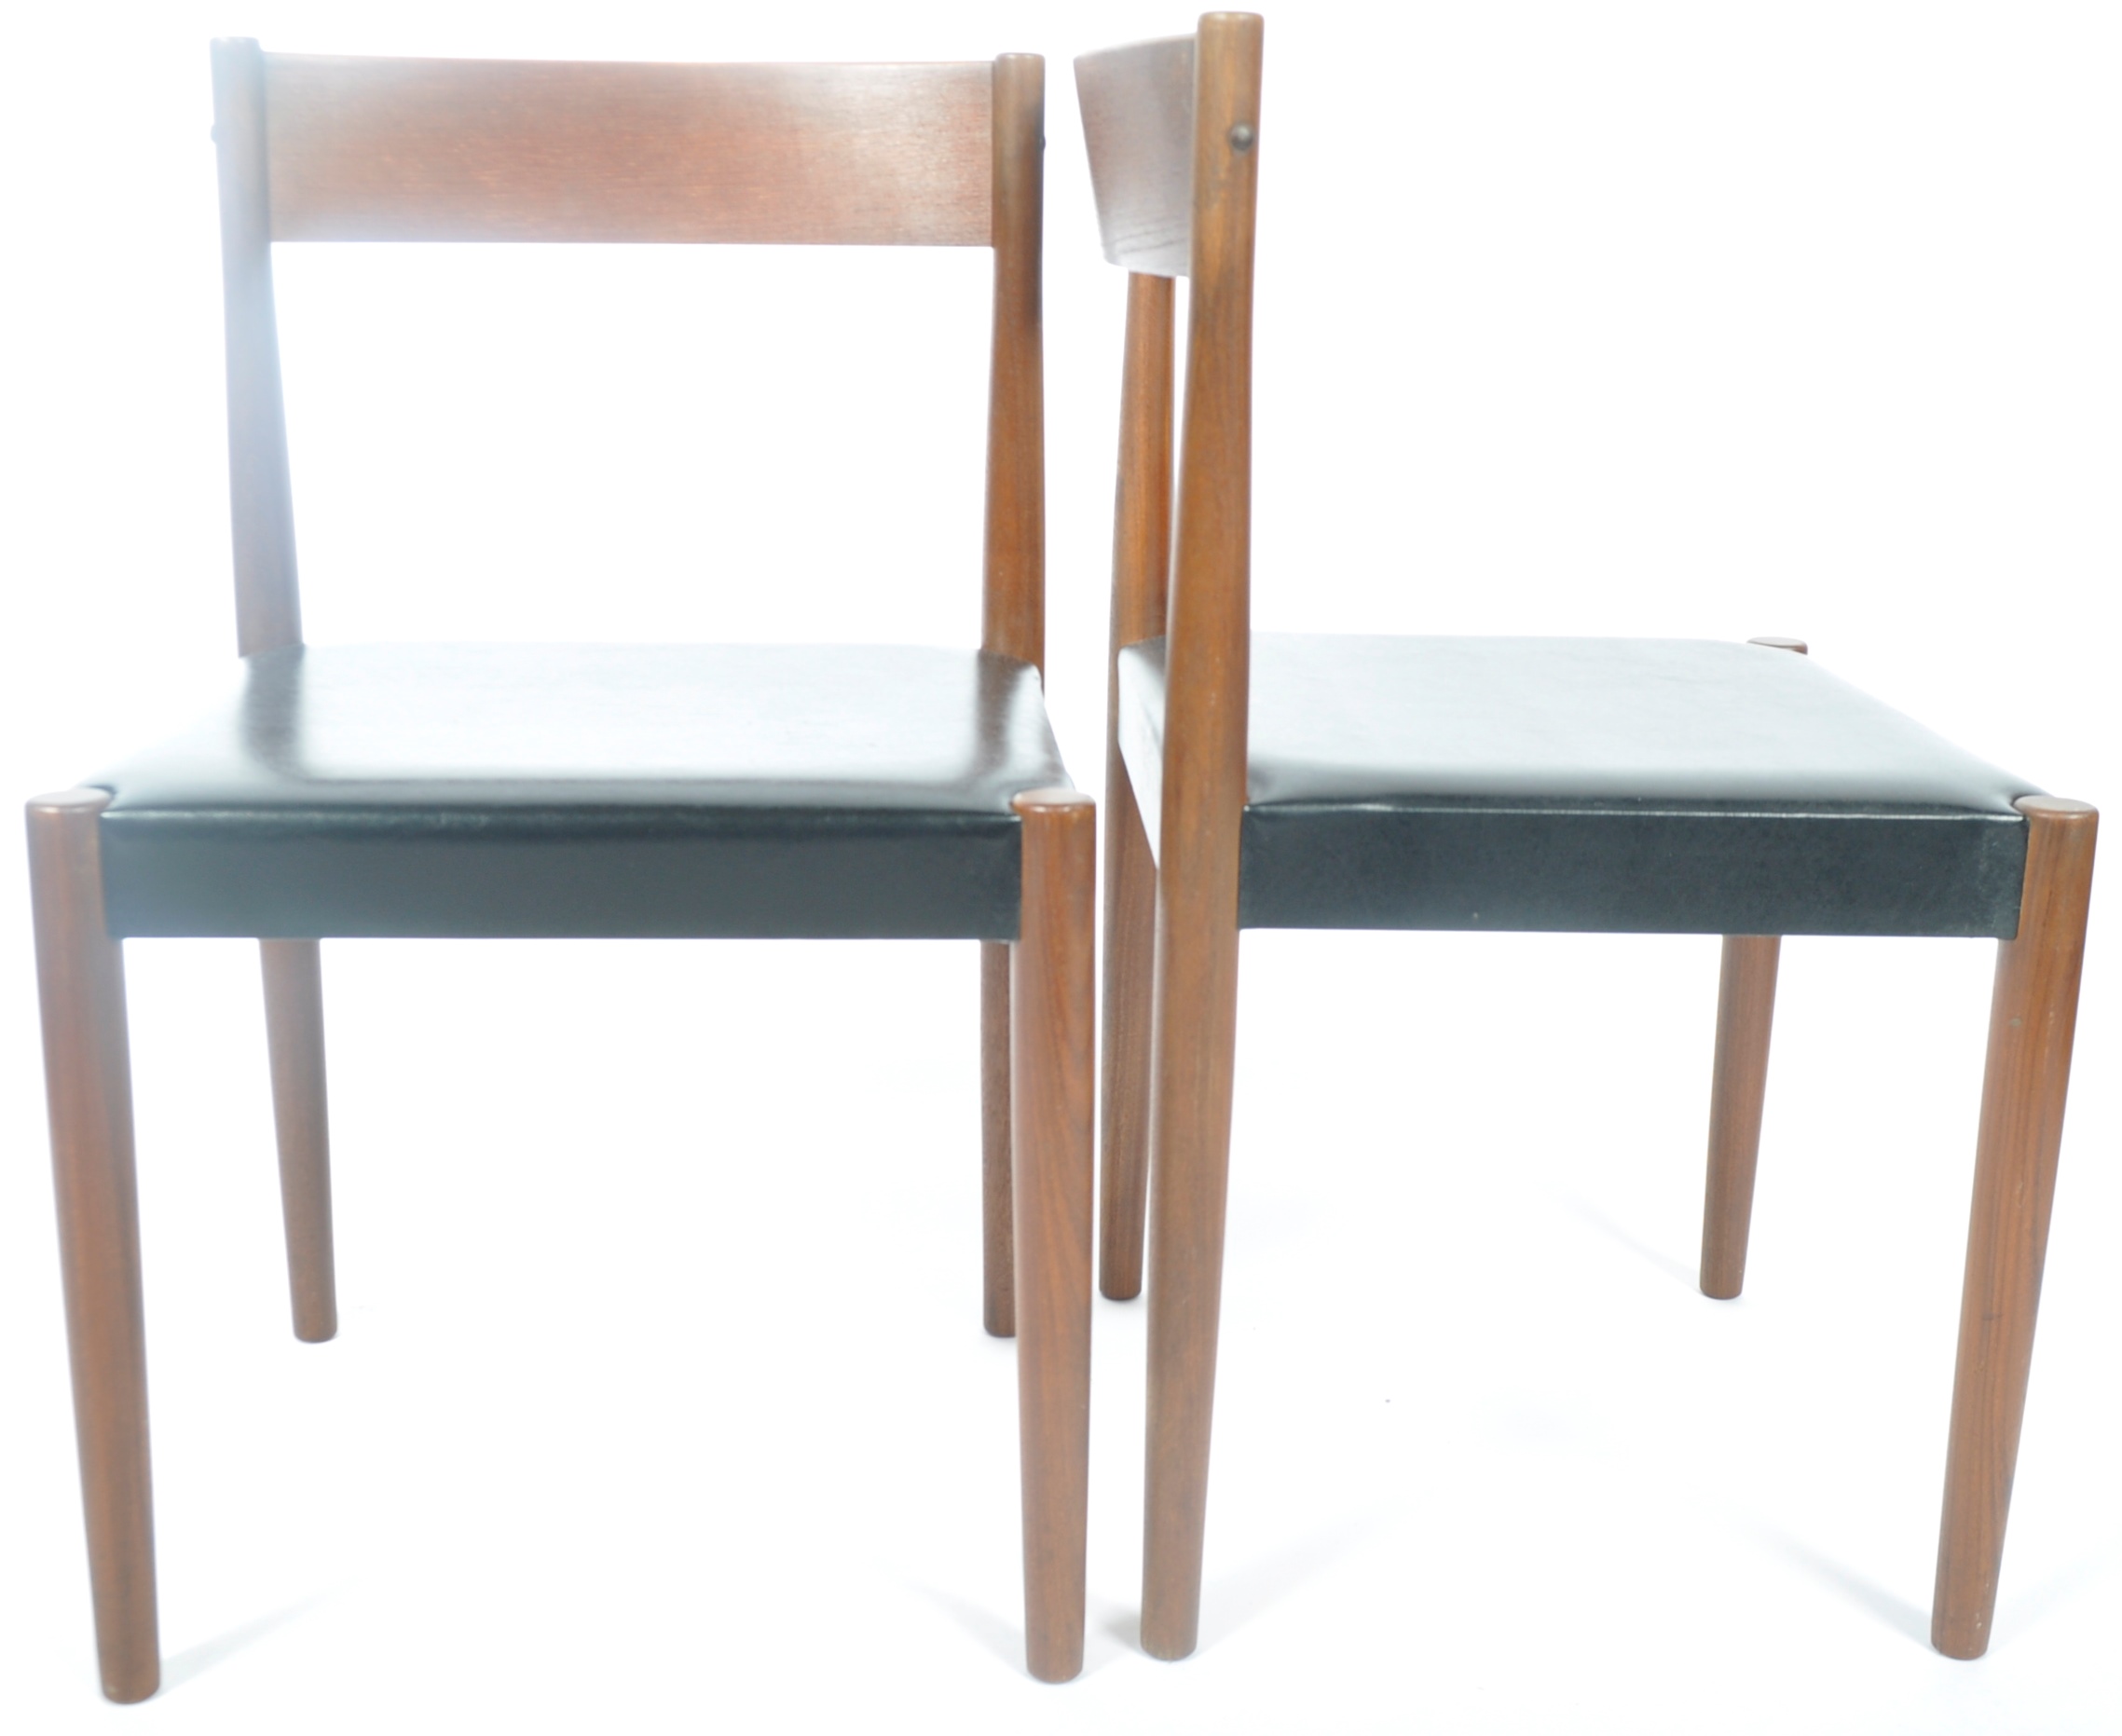 POUL VOLTHER FOR FREM ROJLE MATCHING SET OF SIX CHAIRS - Image 5 of 7